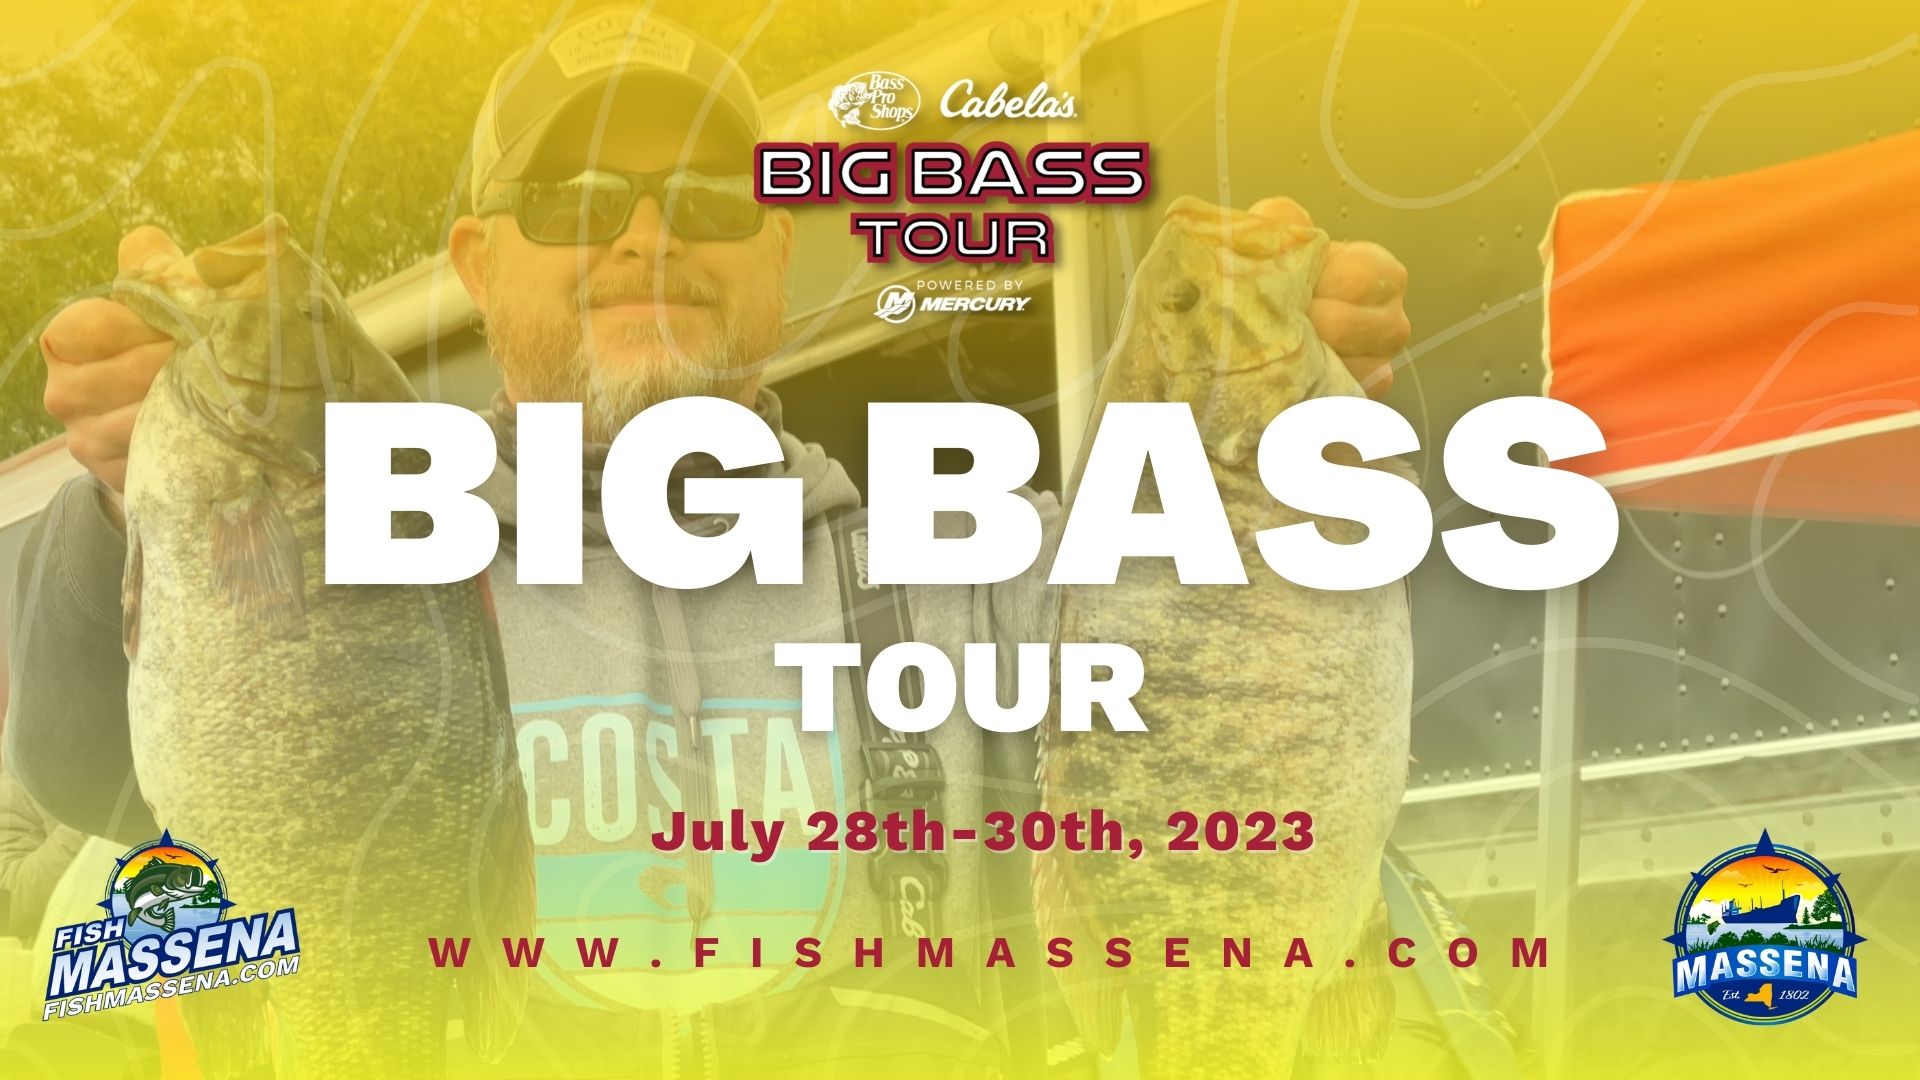 Bass Pro Shops/Cabela's Big Bass Tour On The St. Lawrence River